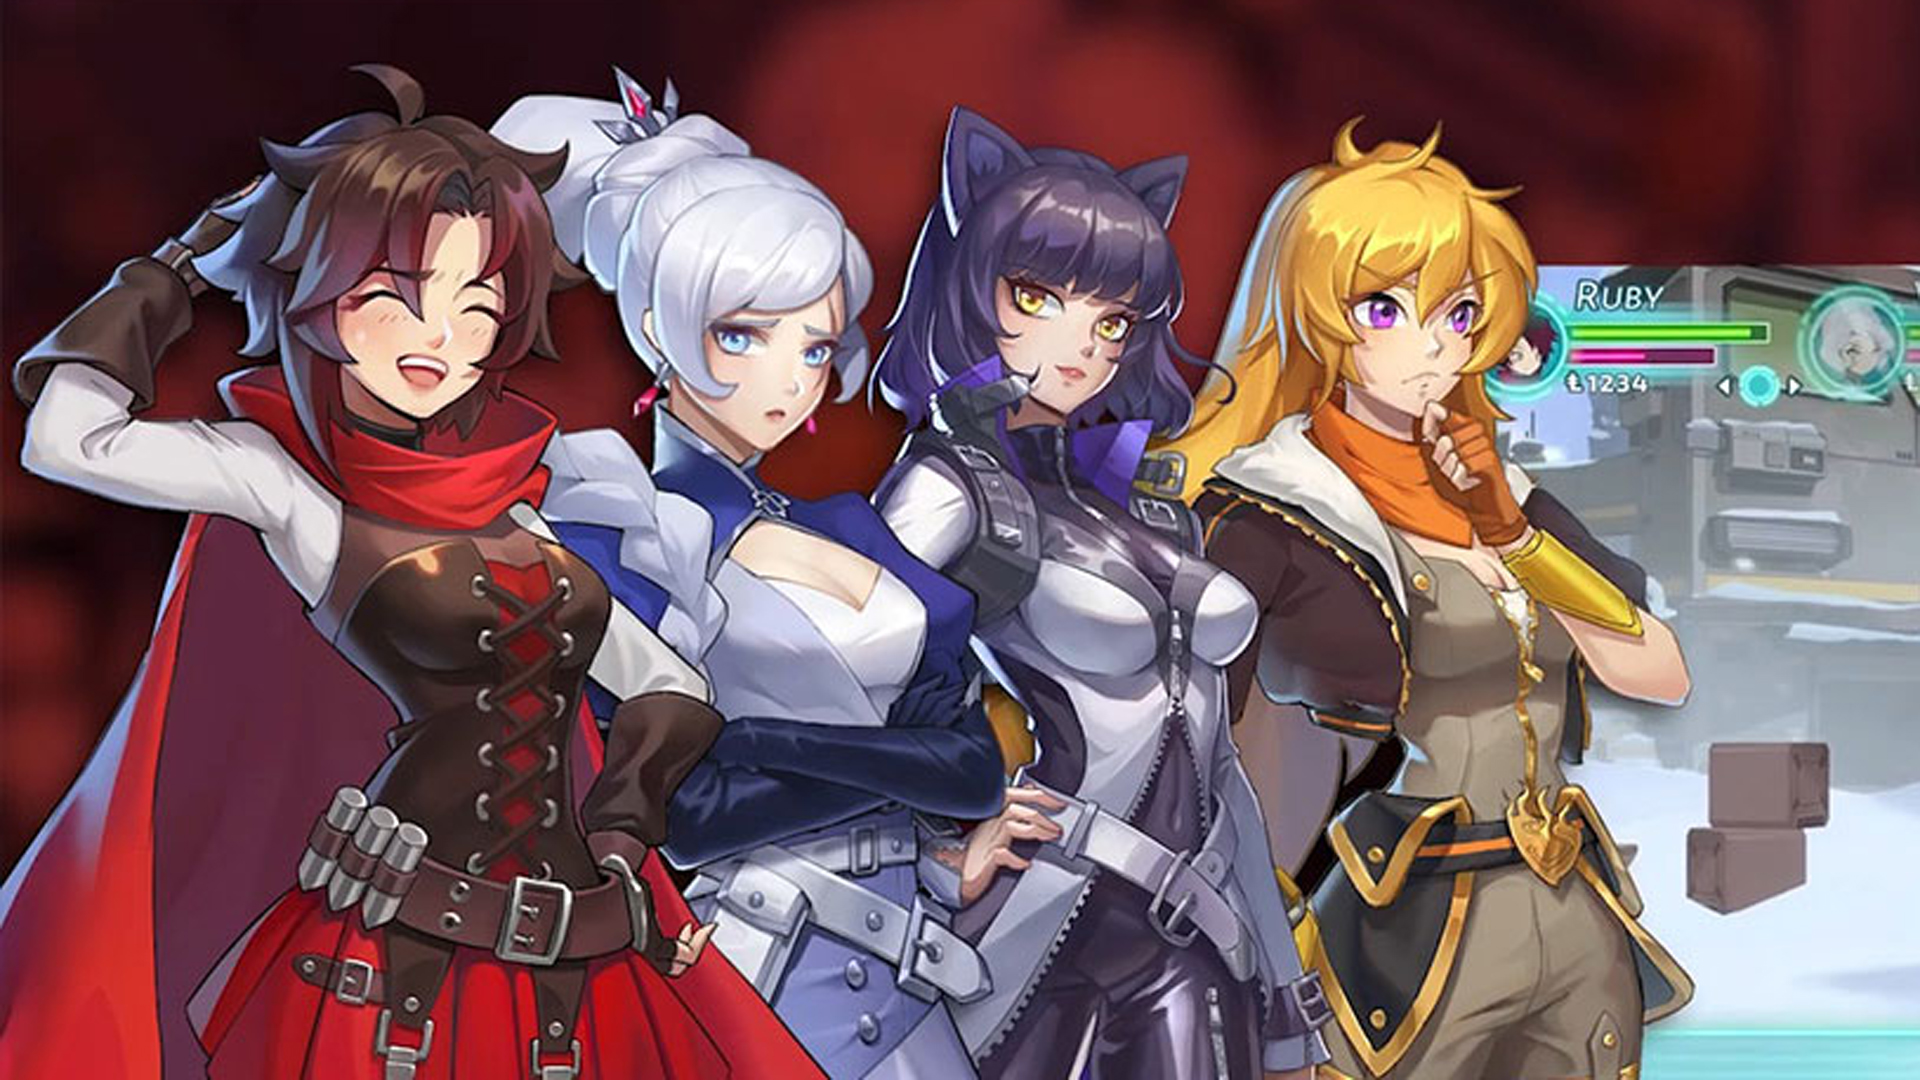 RWBY: Arrowfell is the next 2D Metroidvania from the River City Girls devs